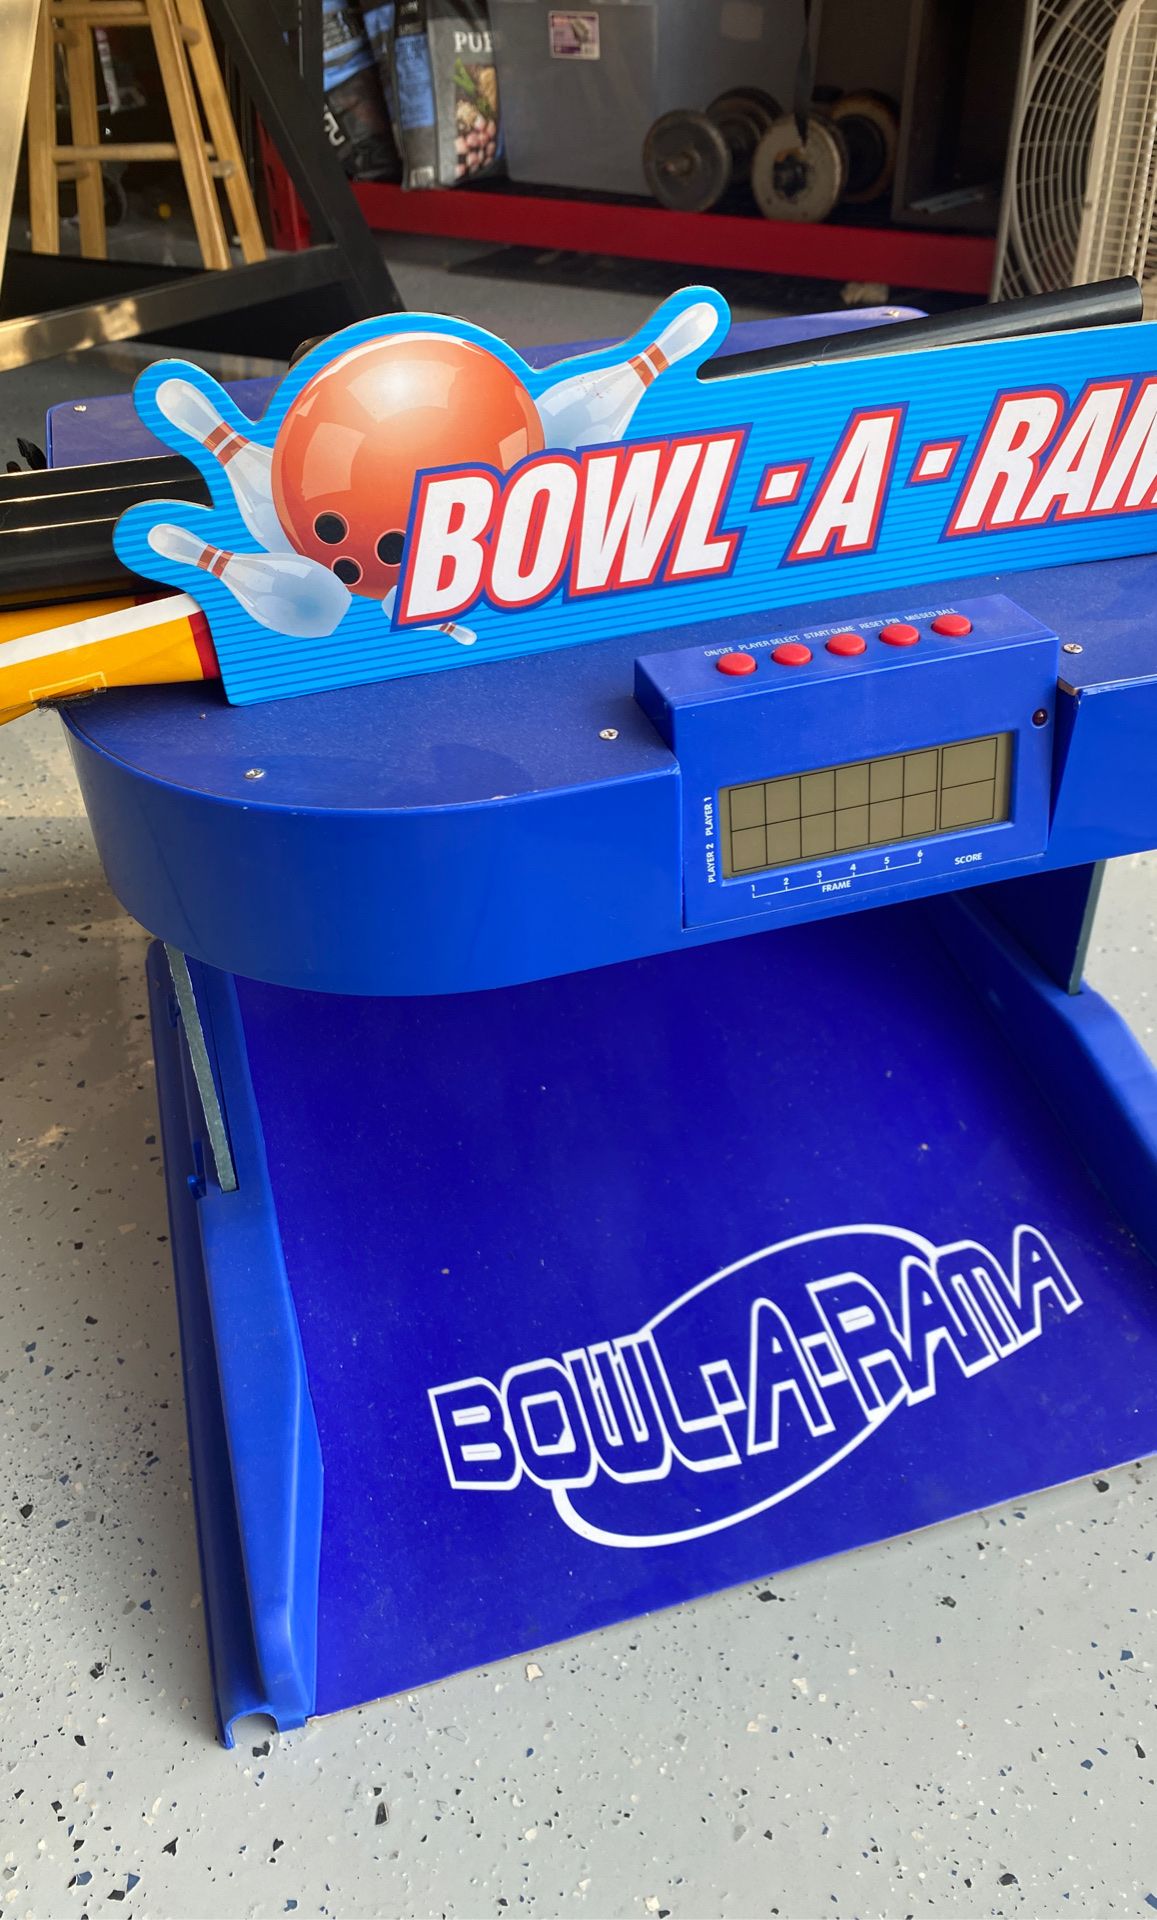 Free bowl-a-rama game only missing balls